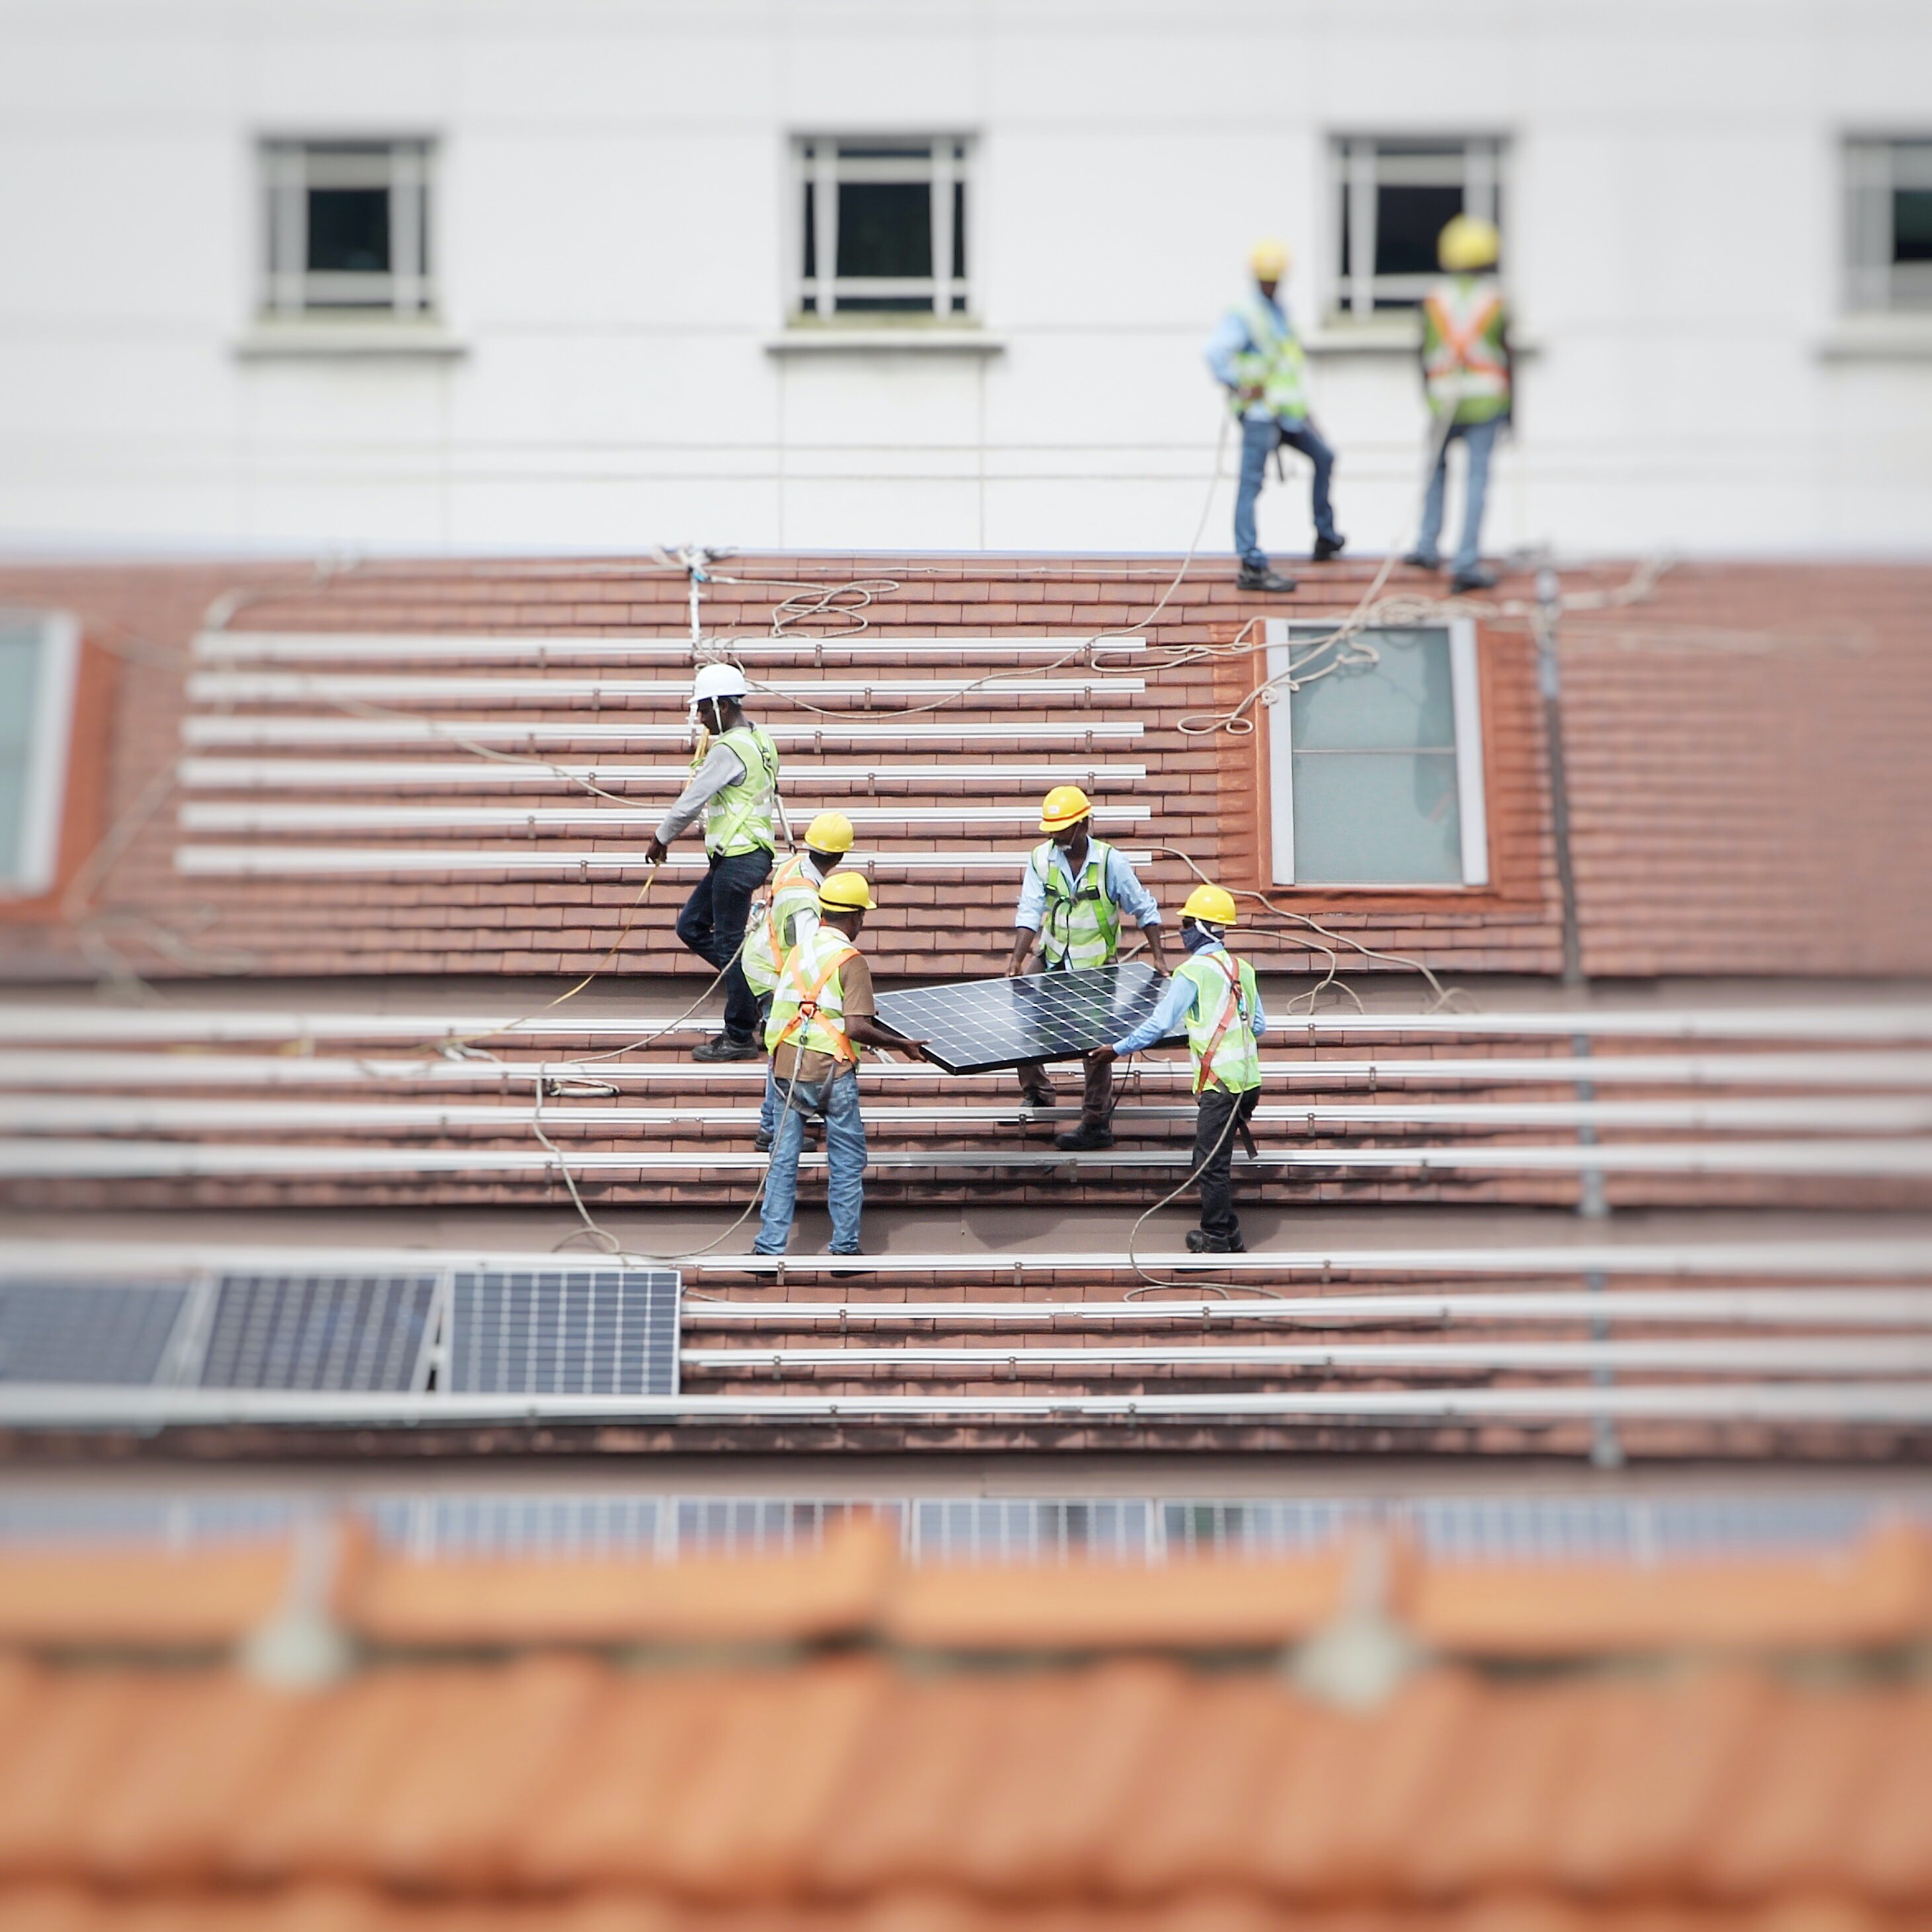 7 Factors to Consider Before Installing Solar Panels on Your Roof